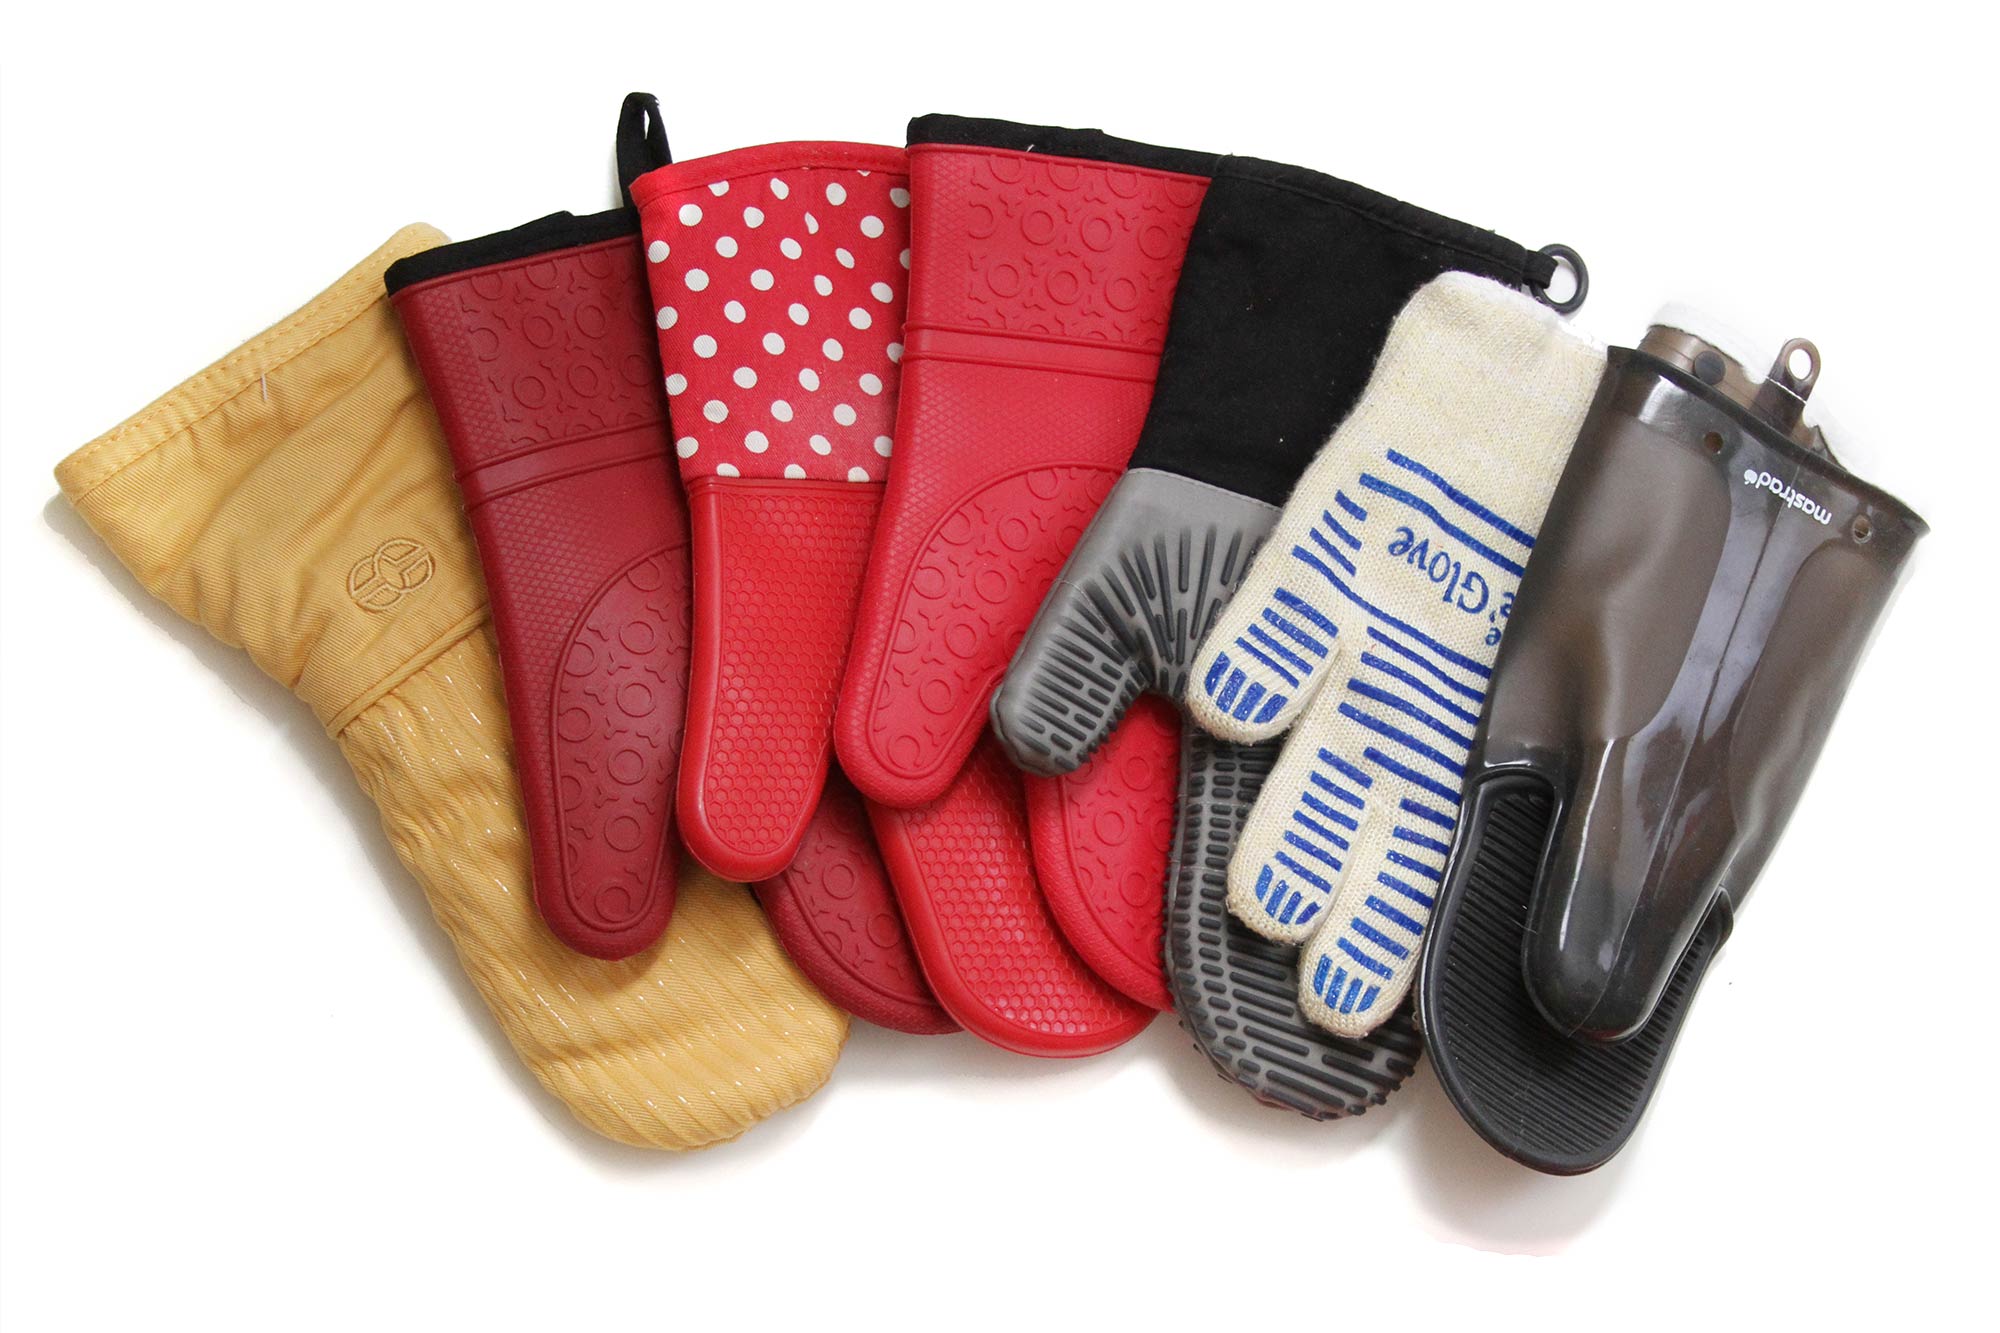 Our Top 10 Best Oven Gloves